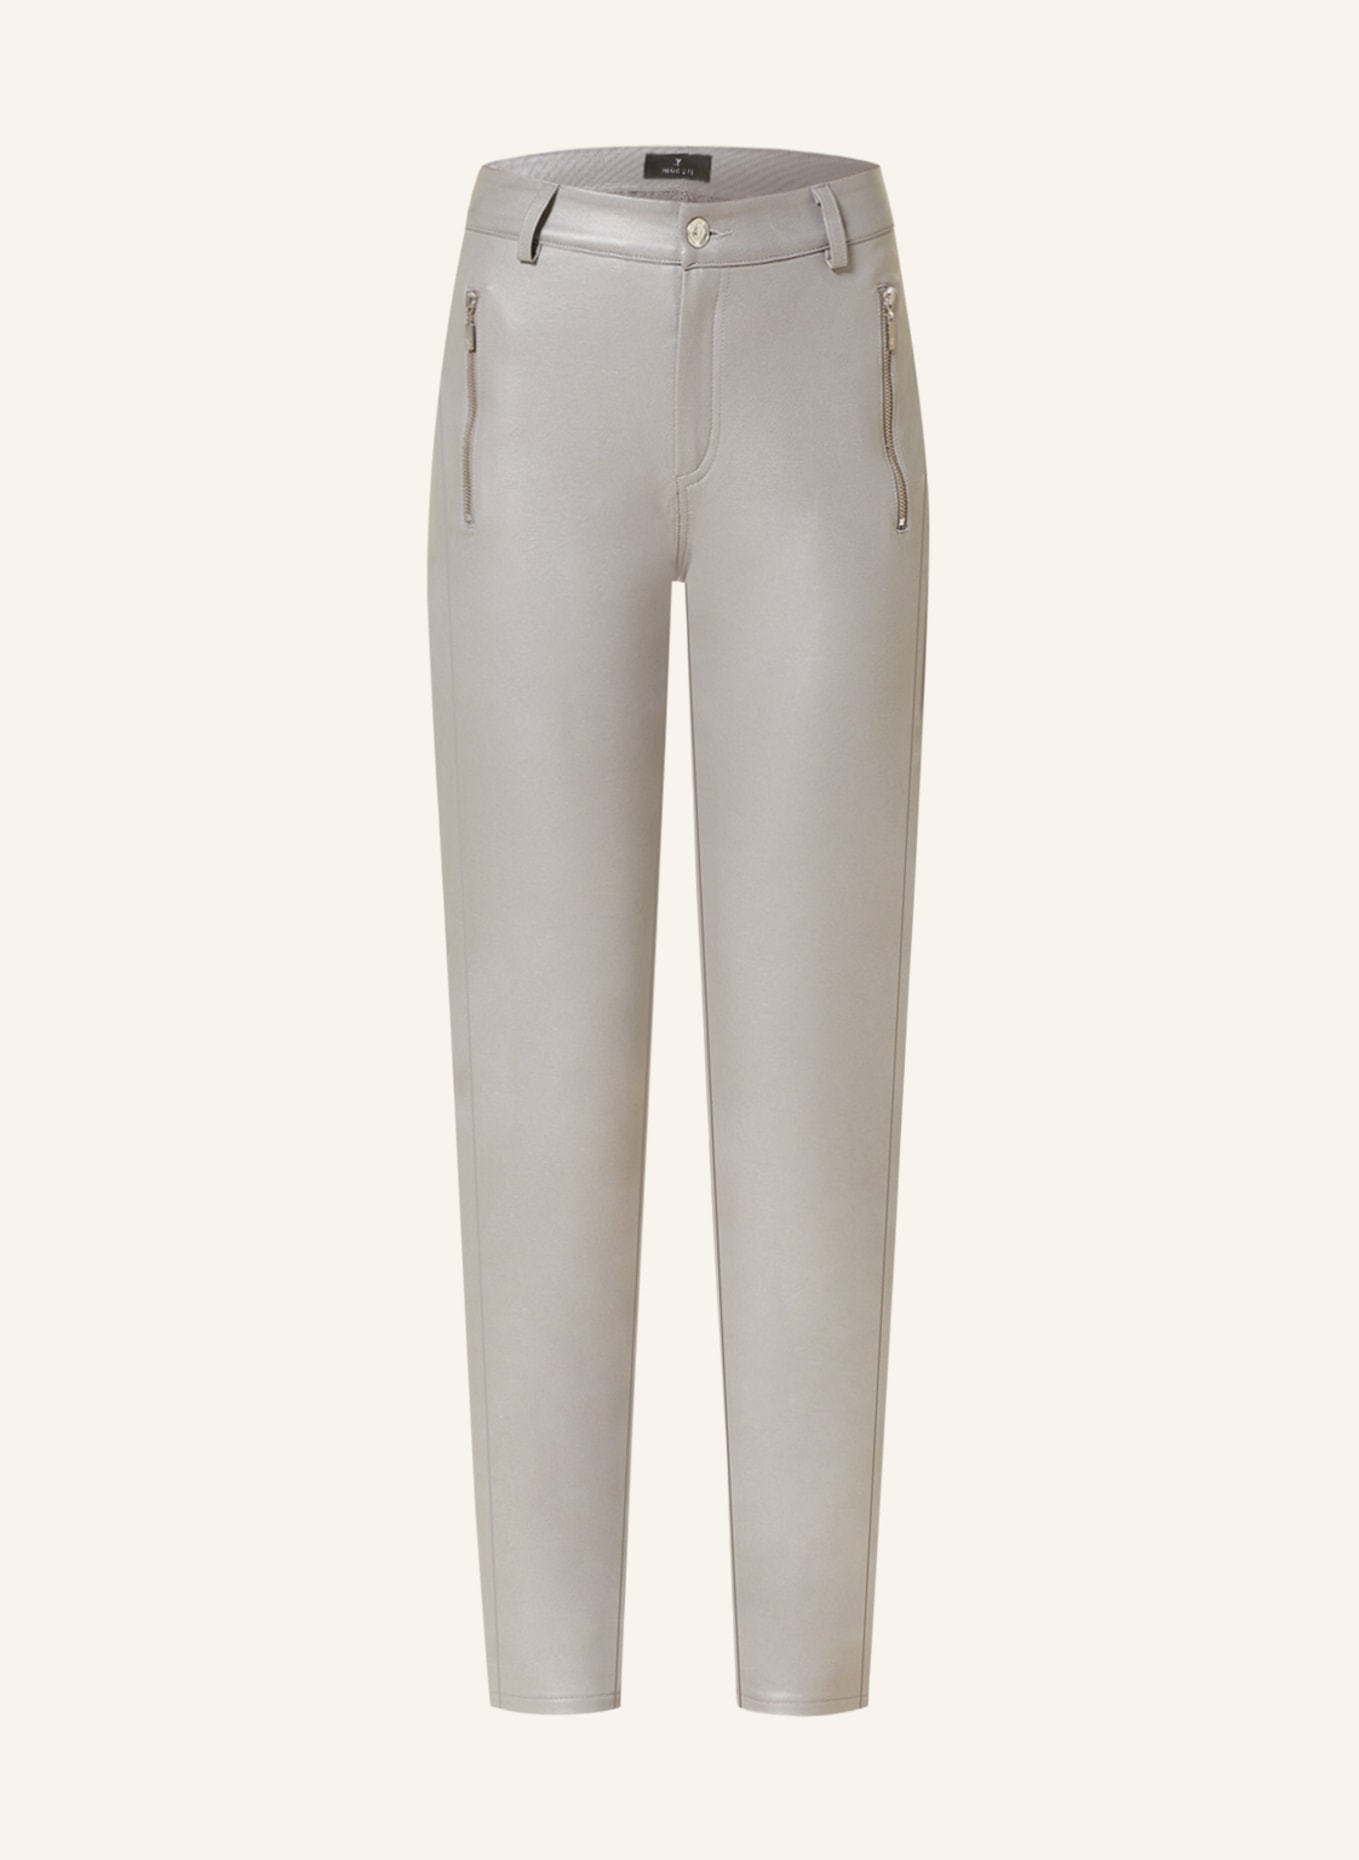 monari Pants in leather look, Color: LIGHT GRAY (Image 1)